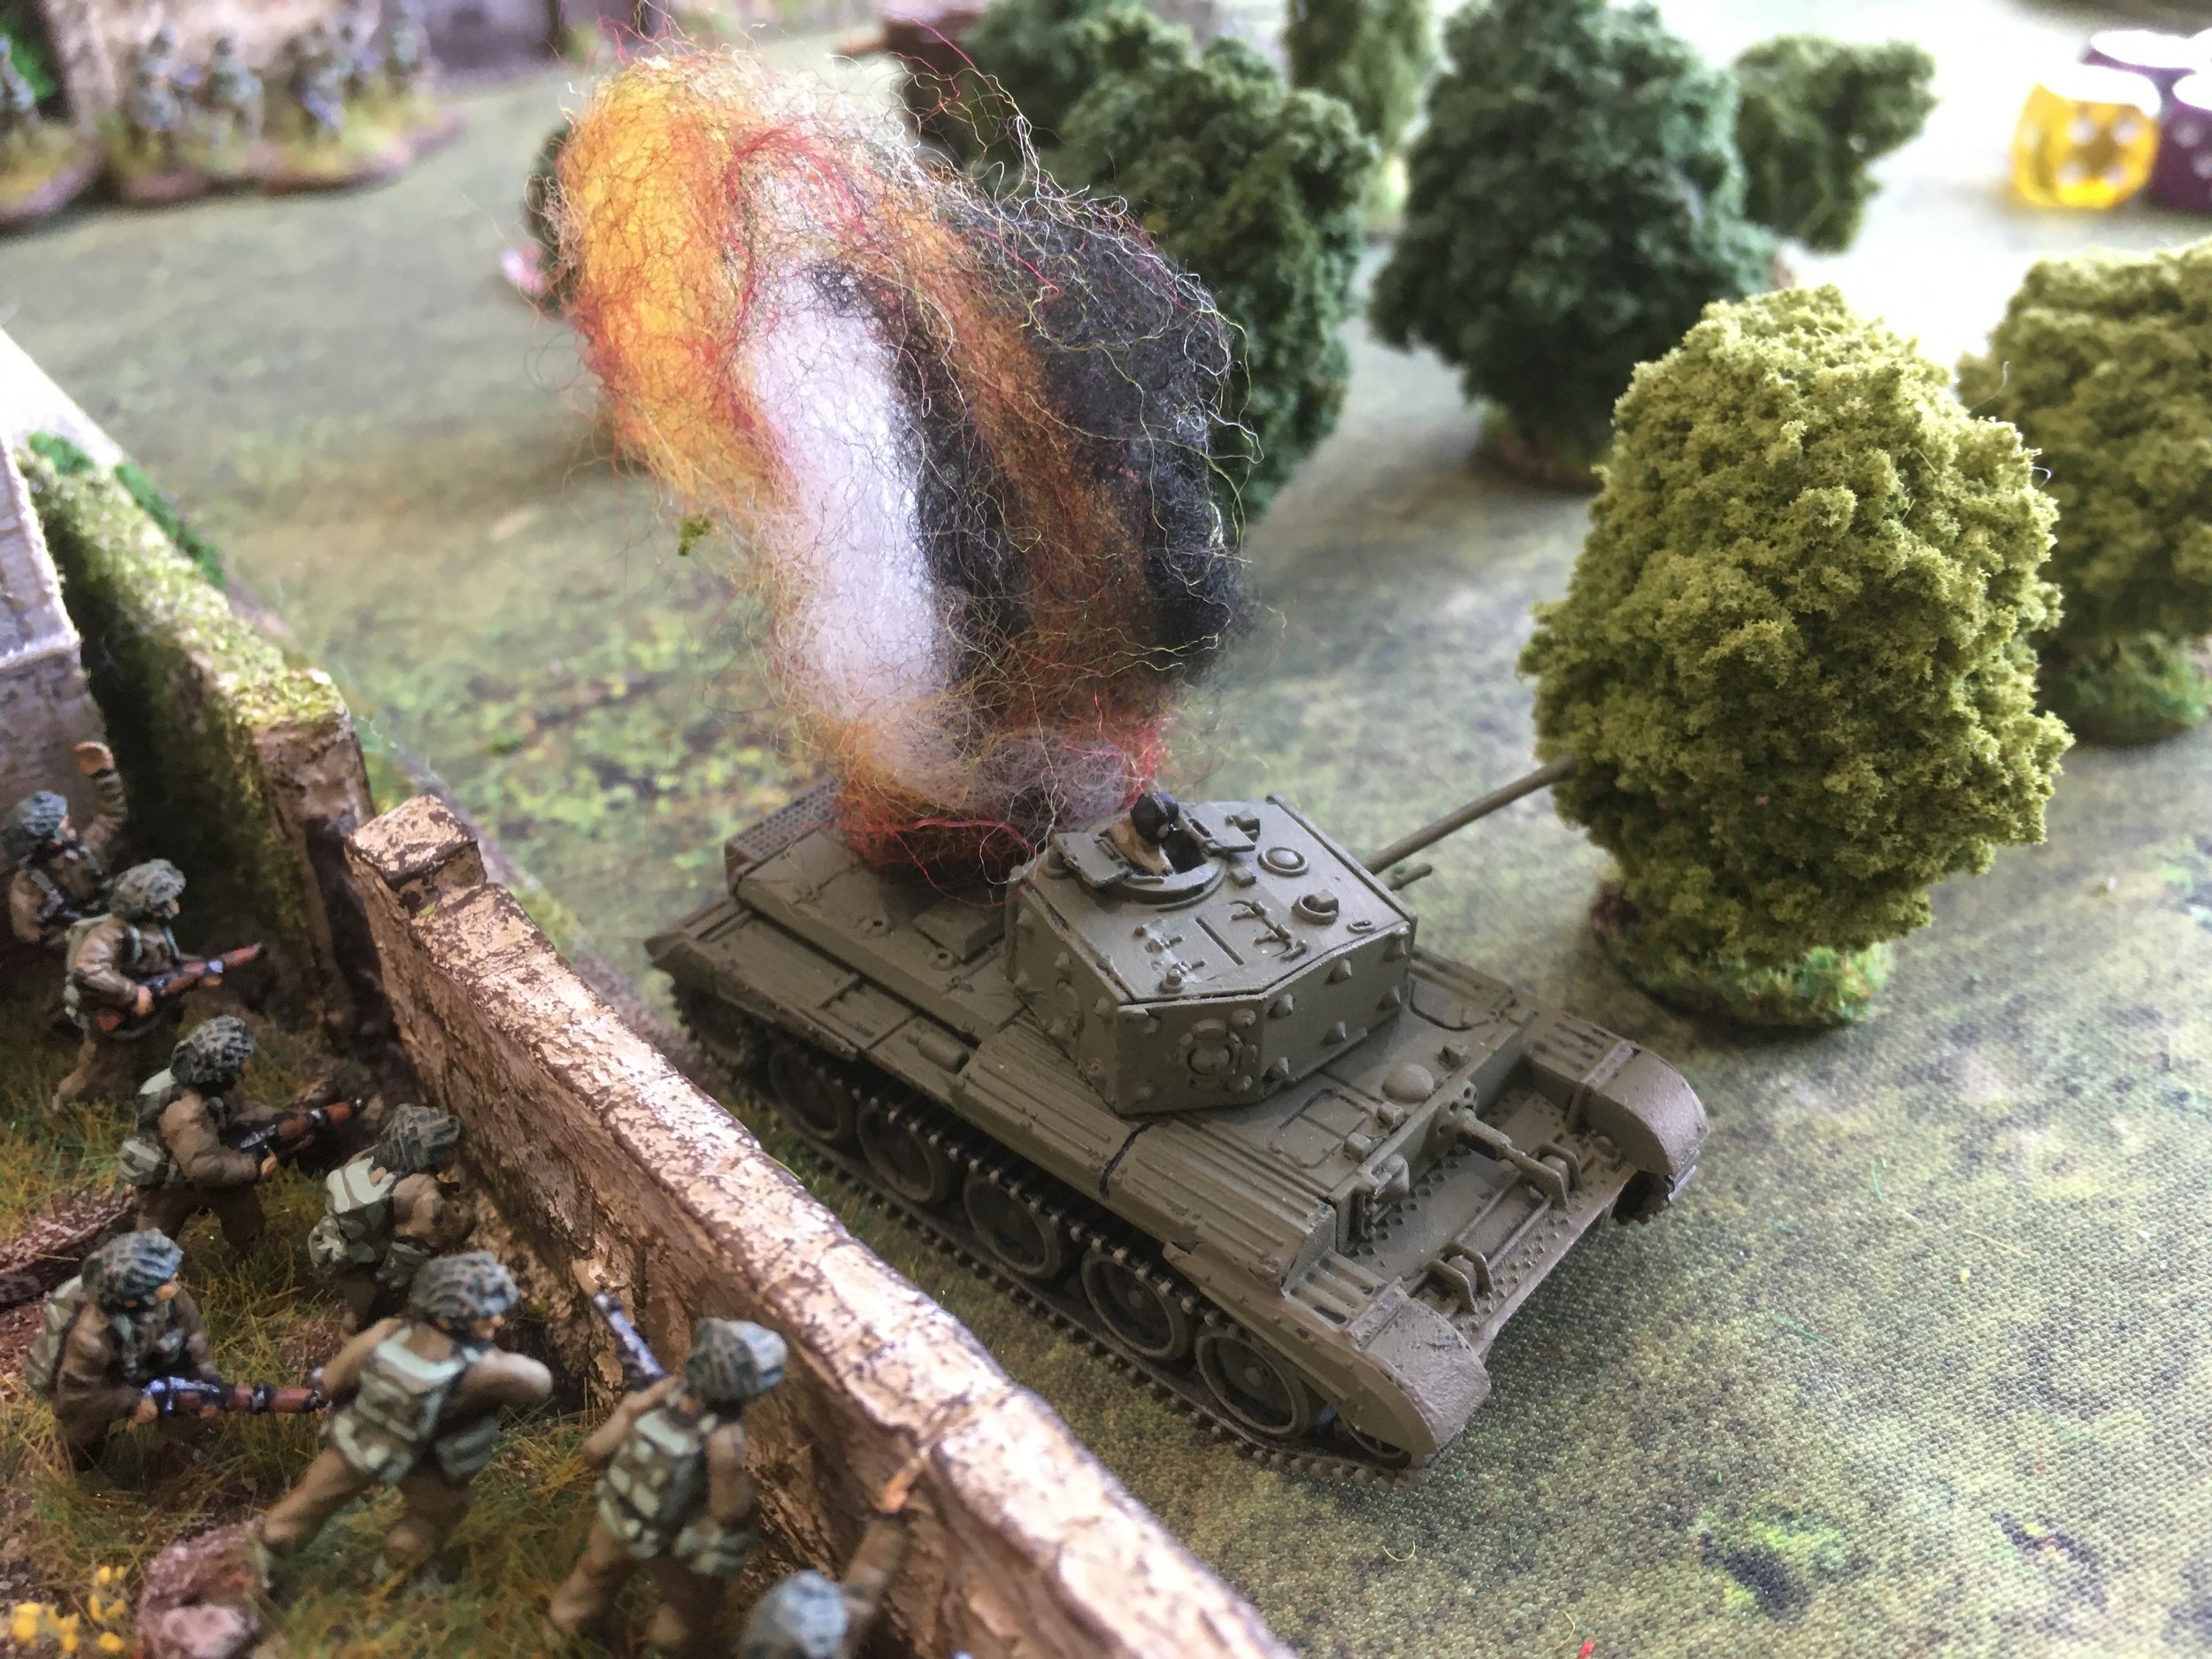  And slammed a 75mm round into its rear!